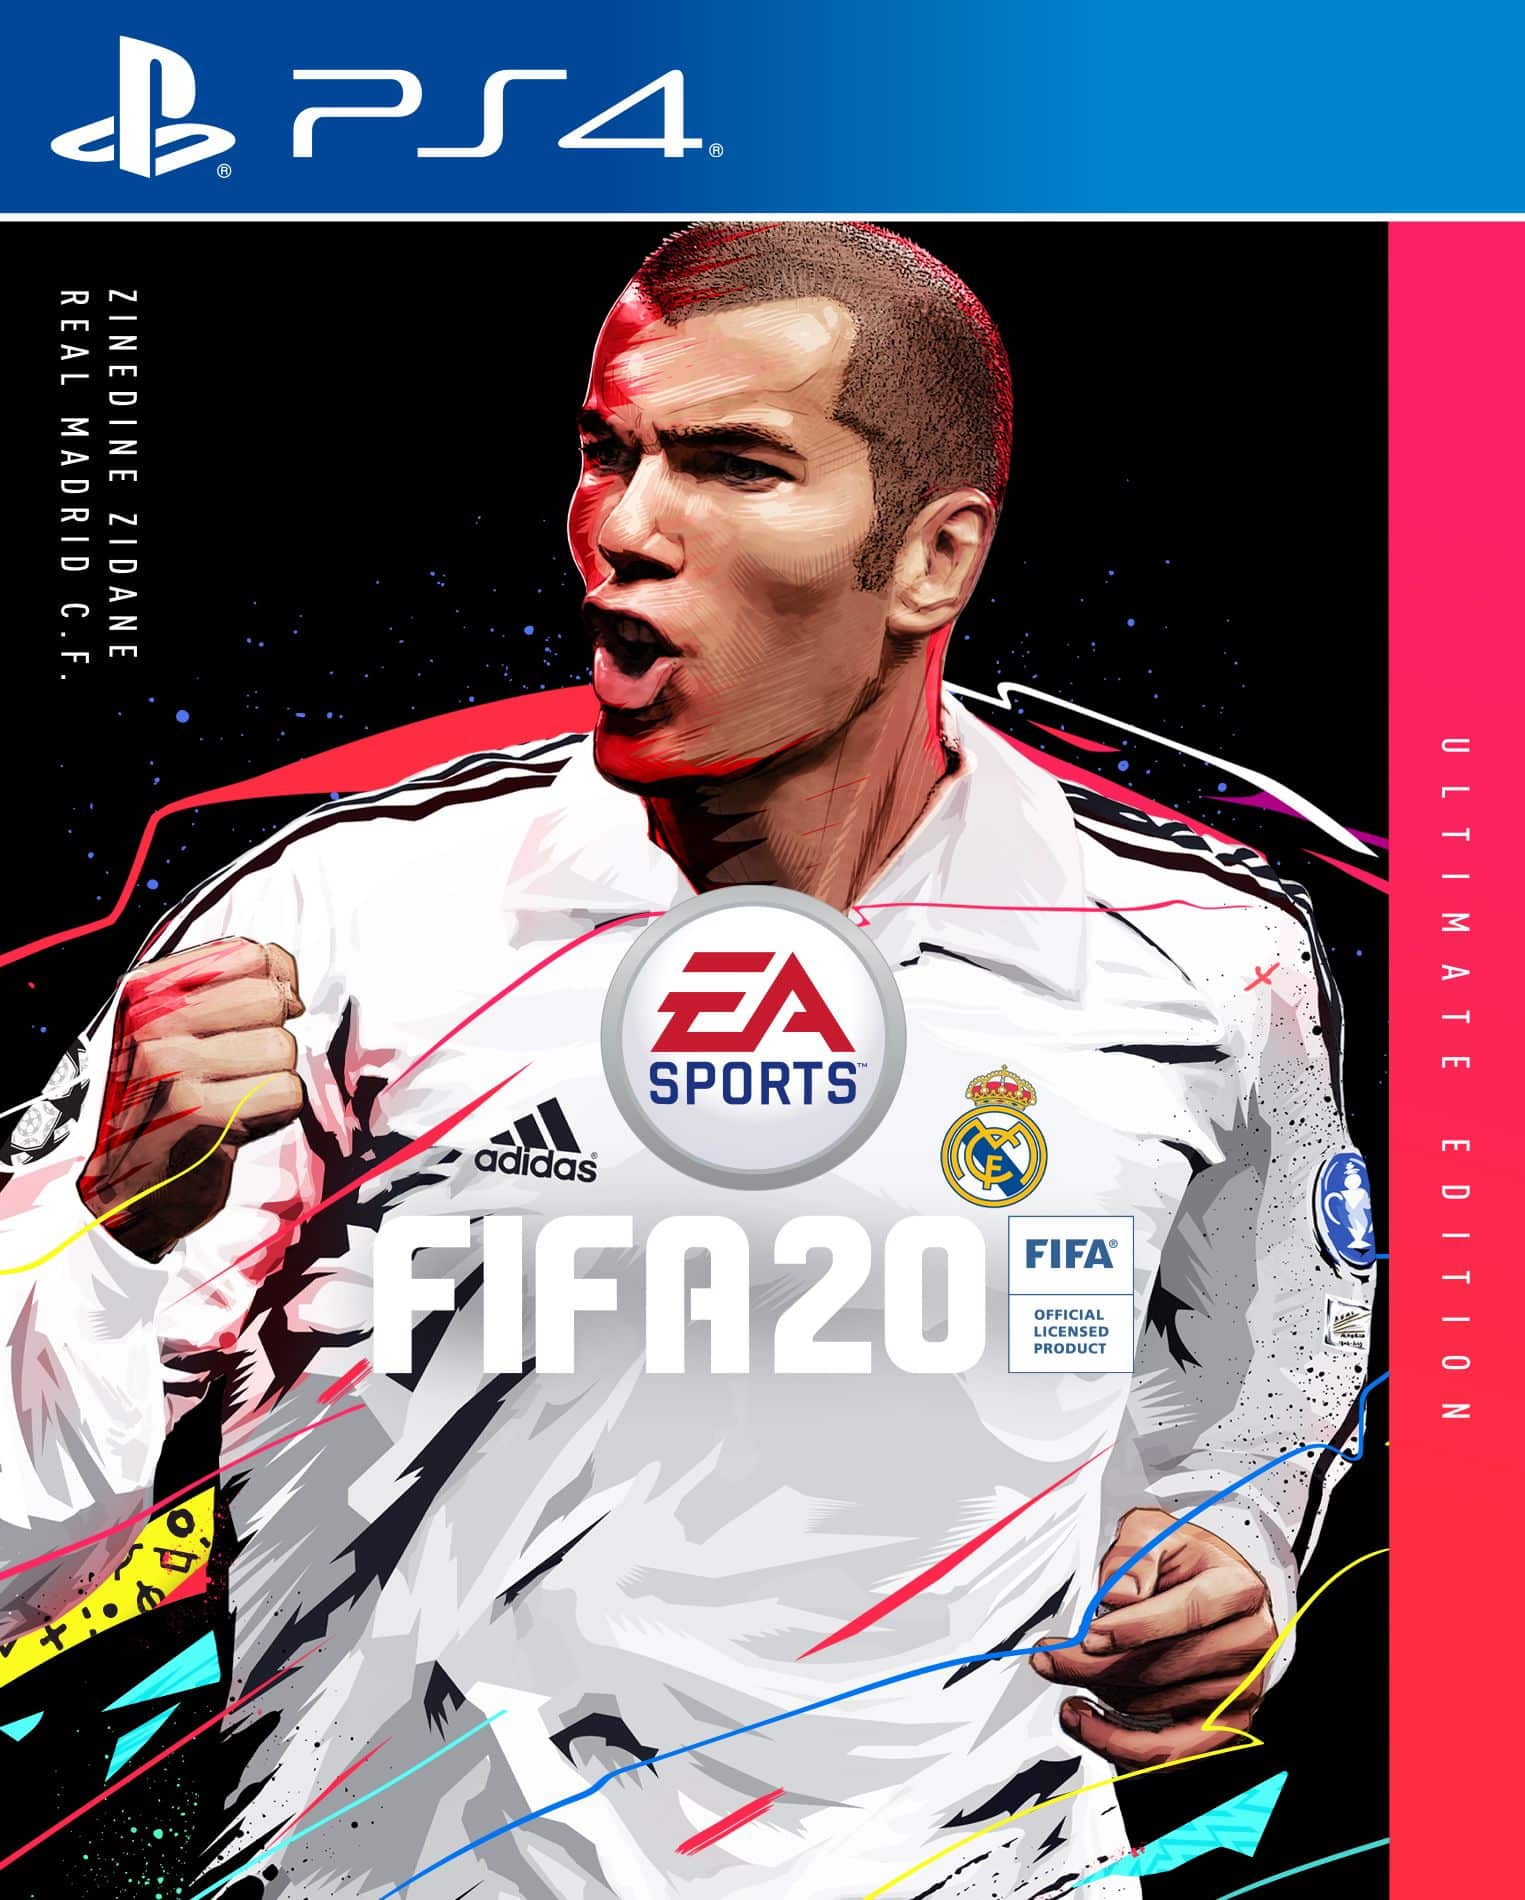 Fifa FIFA 20 onthult Zidane als FUT ICON & Ultimate Edition Cover Star|Pinterest